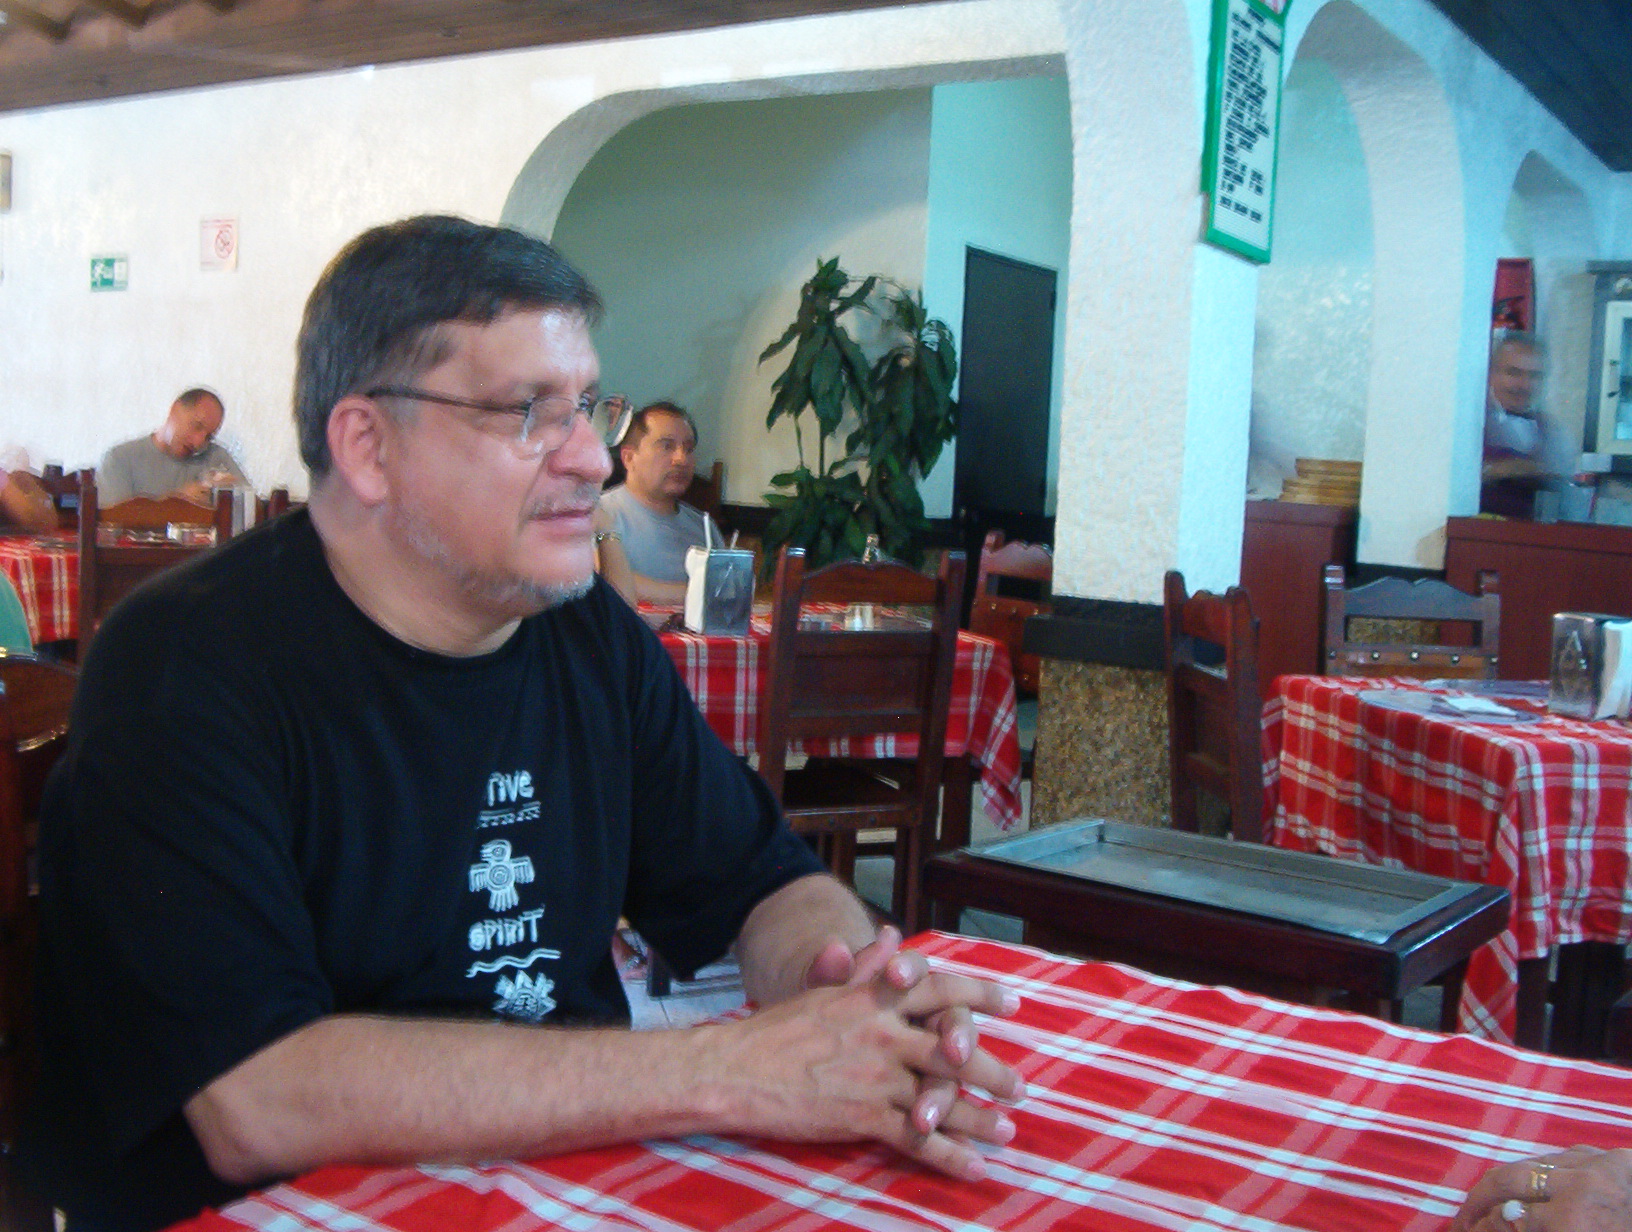 a man sits at a table in front of another person